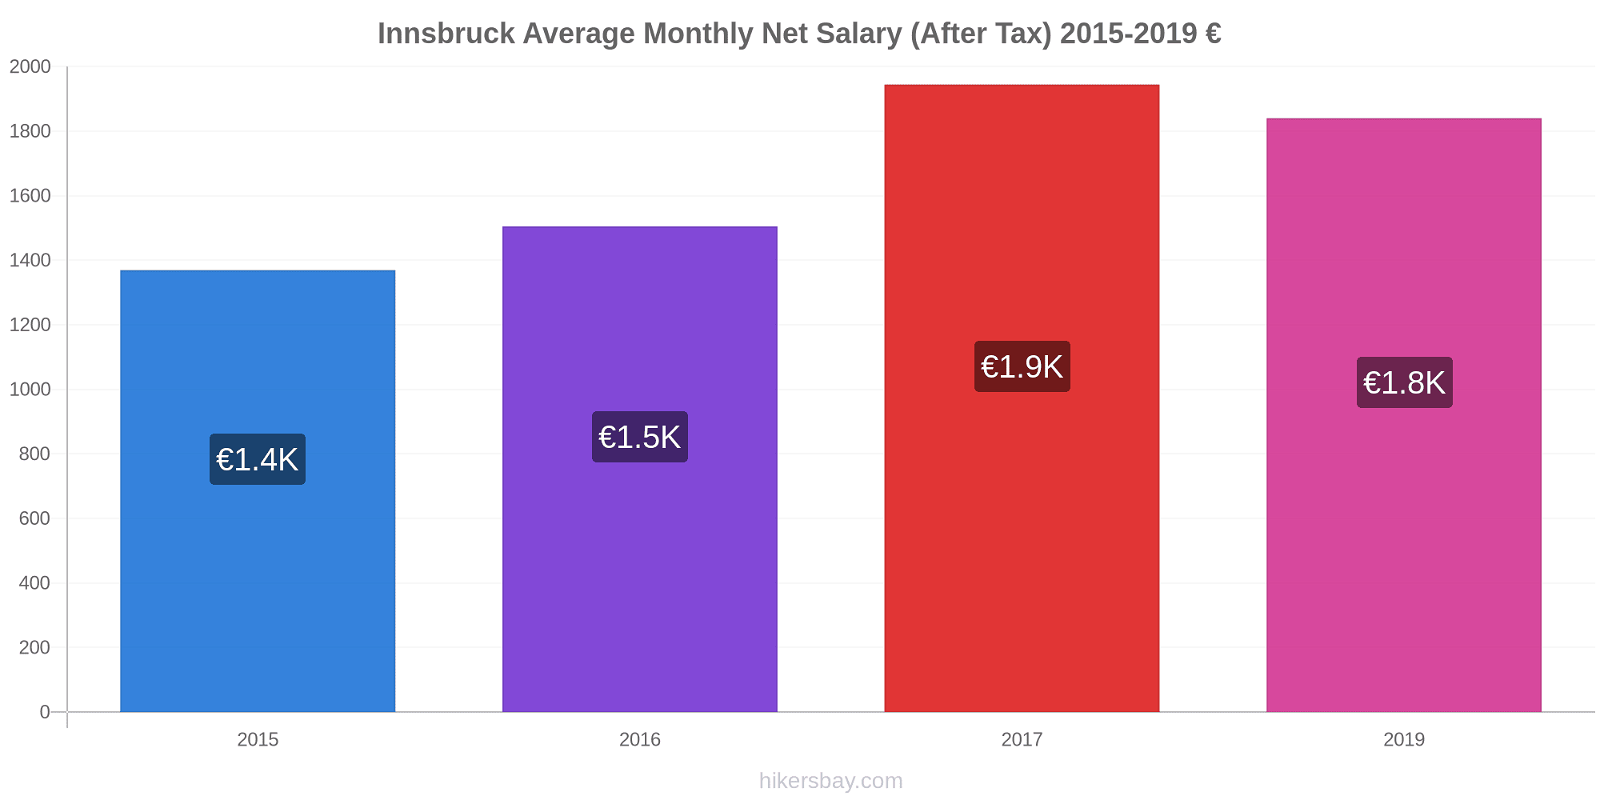 Innsbruck price changes Average Monthly Net Salary (After Tax) hikersbay.com